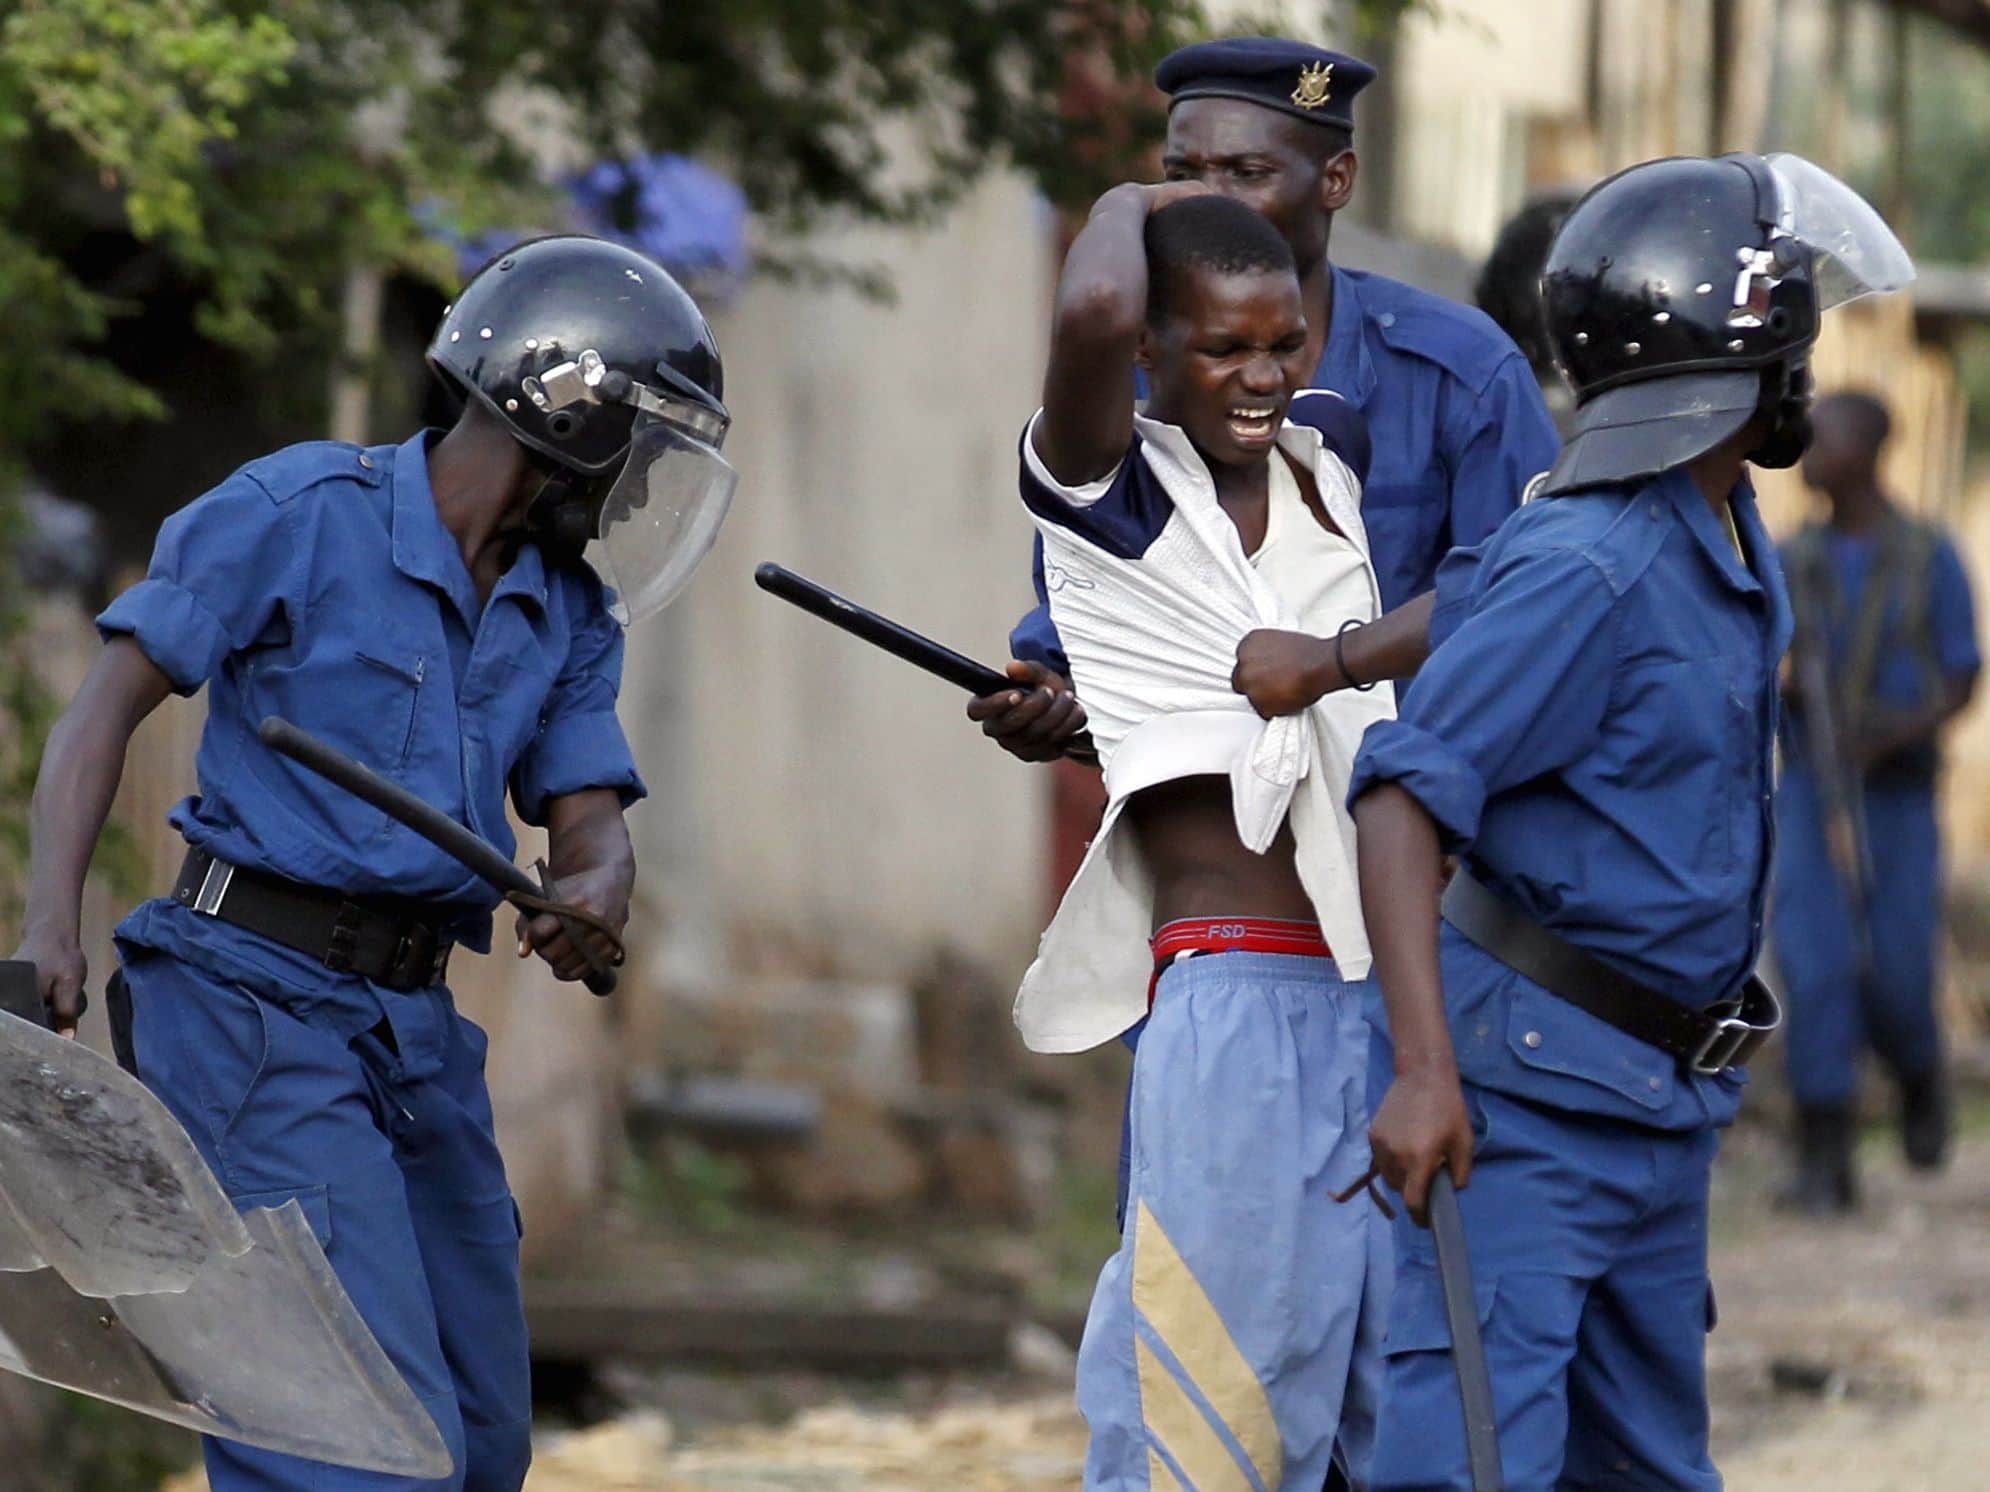 Riot police detain a resident participating in street protests in Bujumbura, 26 April 2015, REUTERS/Thomas Mukoya